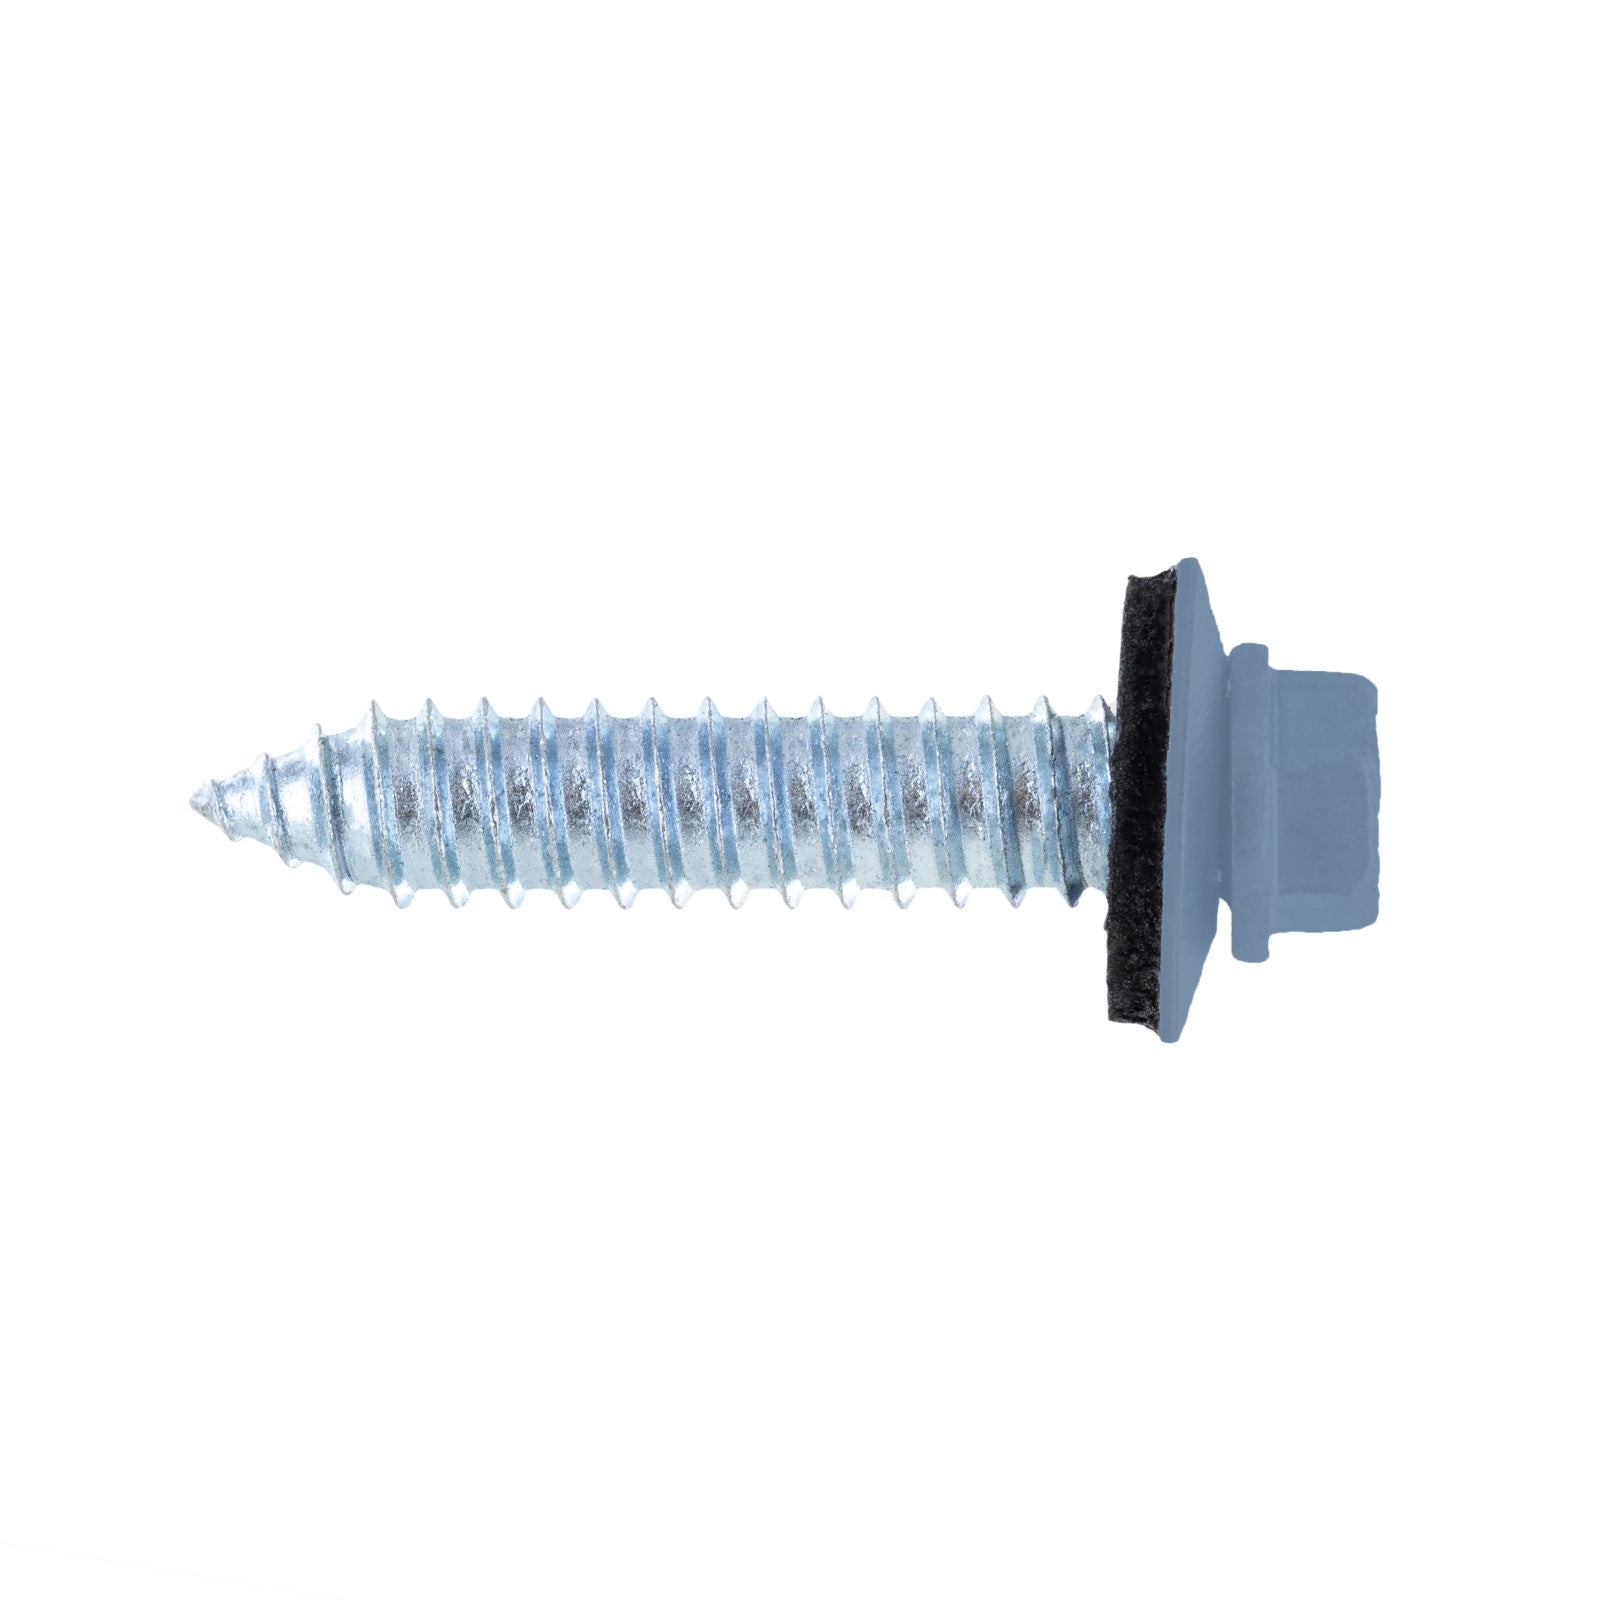 #17 x 1-1/4" Tapping Steelbinder Metal Roofing Screw - Blue - Pkg 250